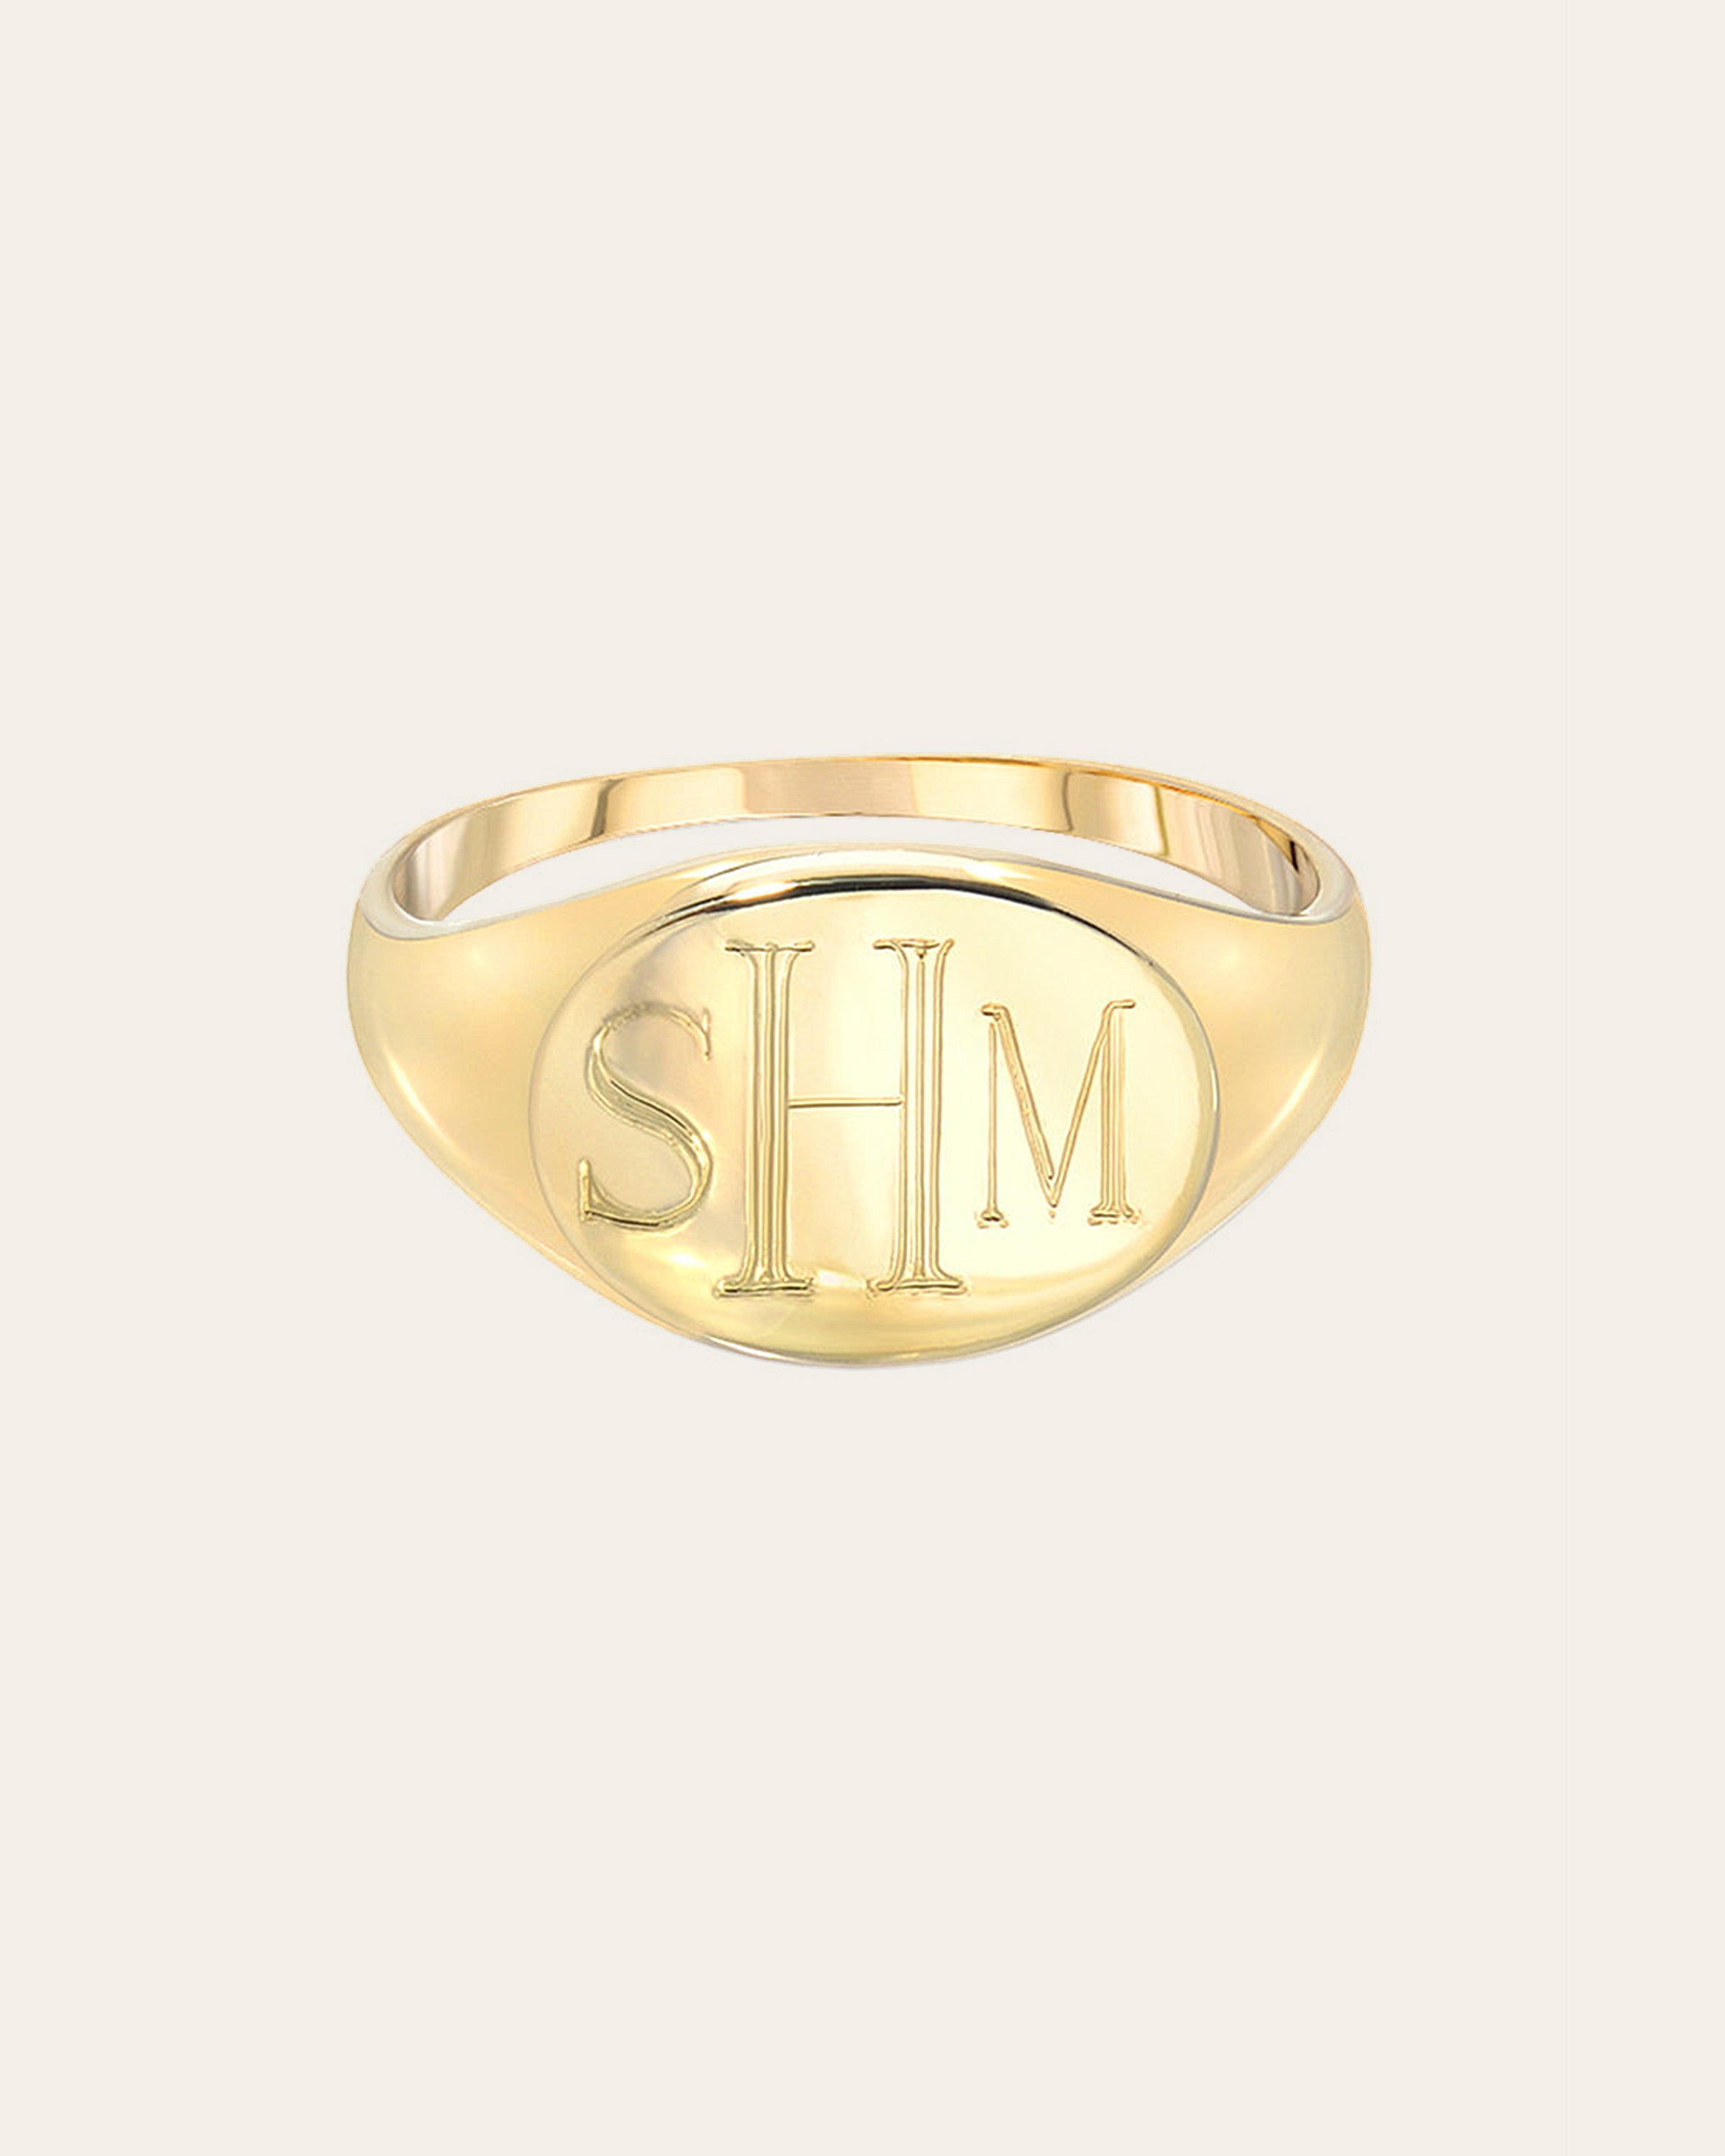 Silver N Style | MONORG2 - Personalized Monogram Ring in Solid 14k Gold |  Custom Fine Jewelry | Initial Script Ring | Fine Jewelry & More